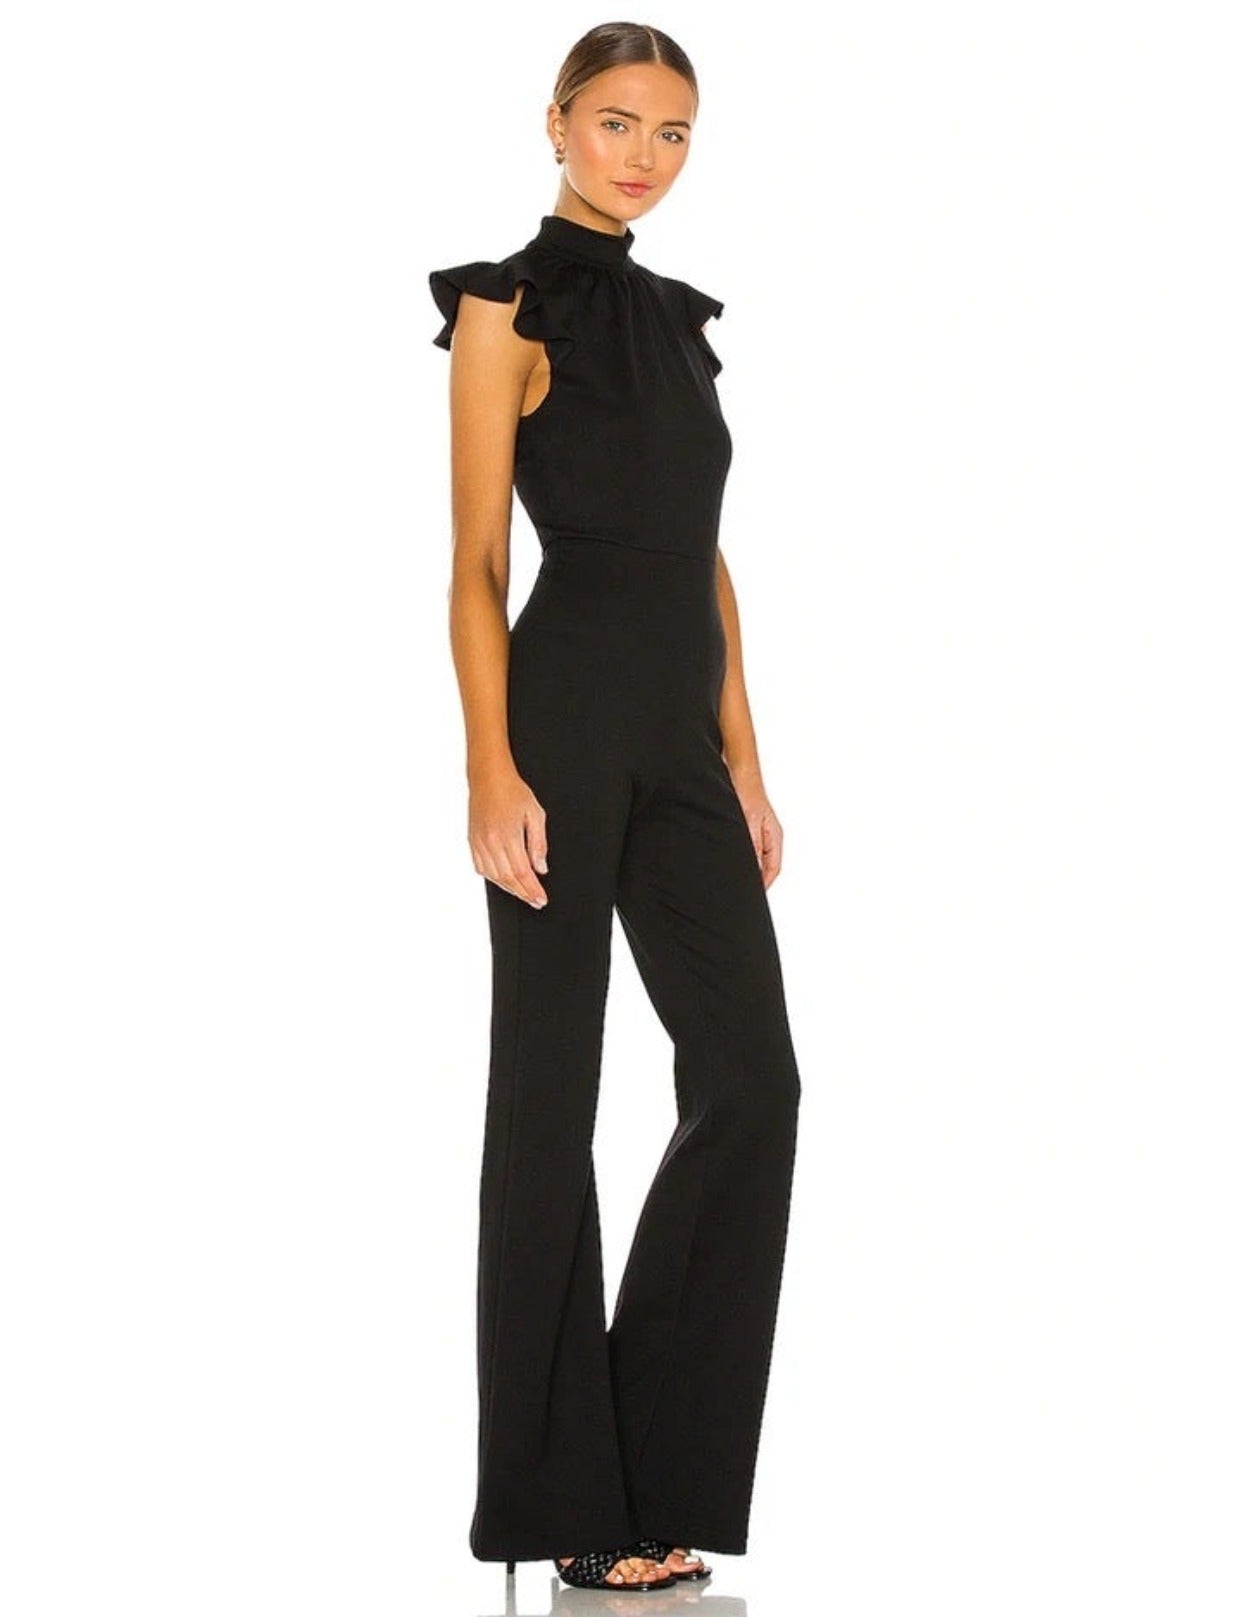 Black Jumpsuit With Ruffles Sleeves